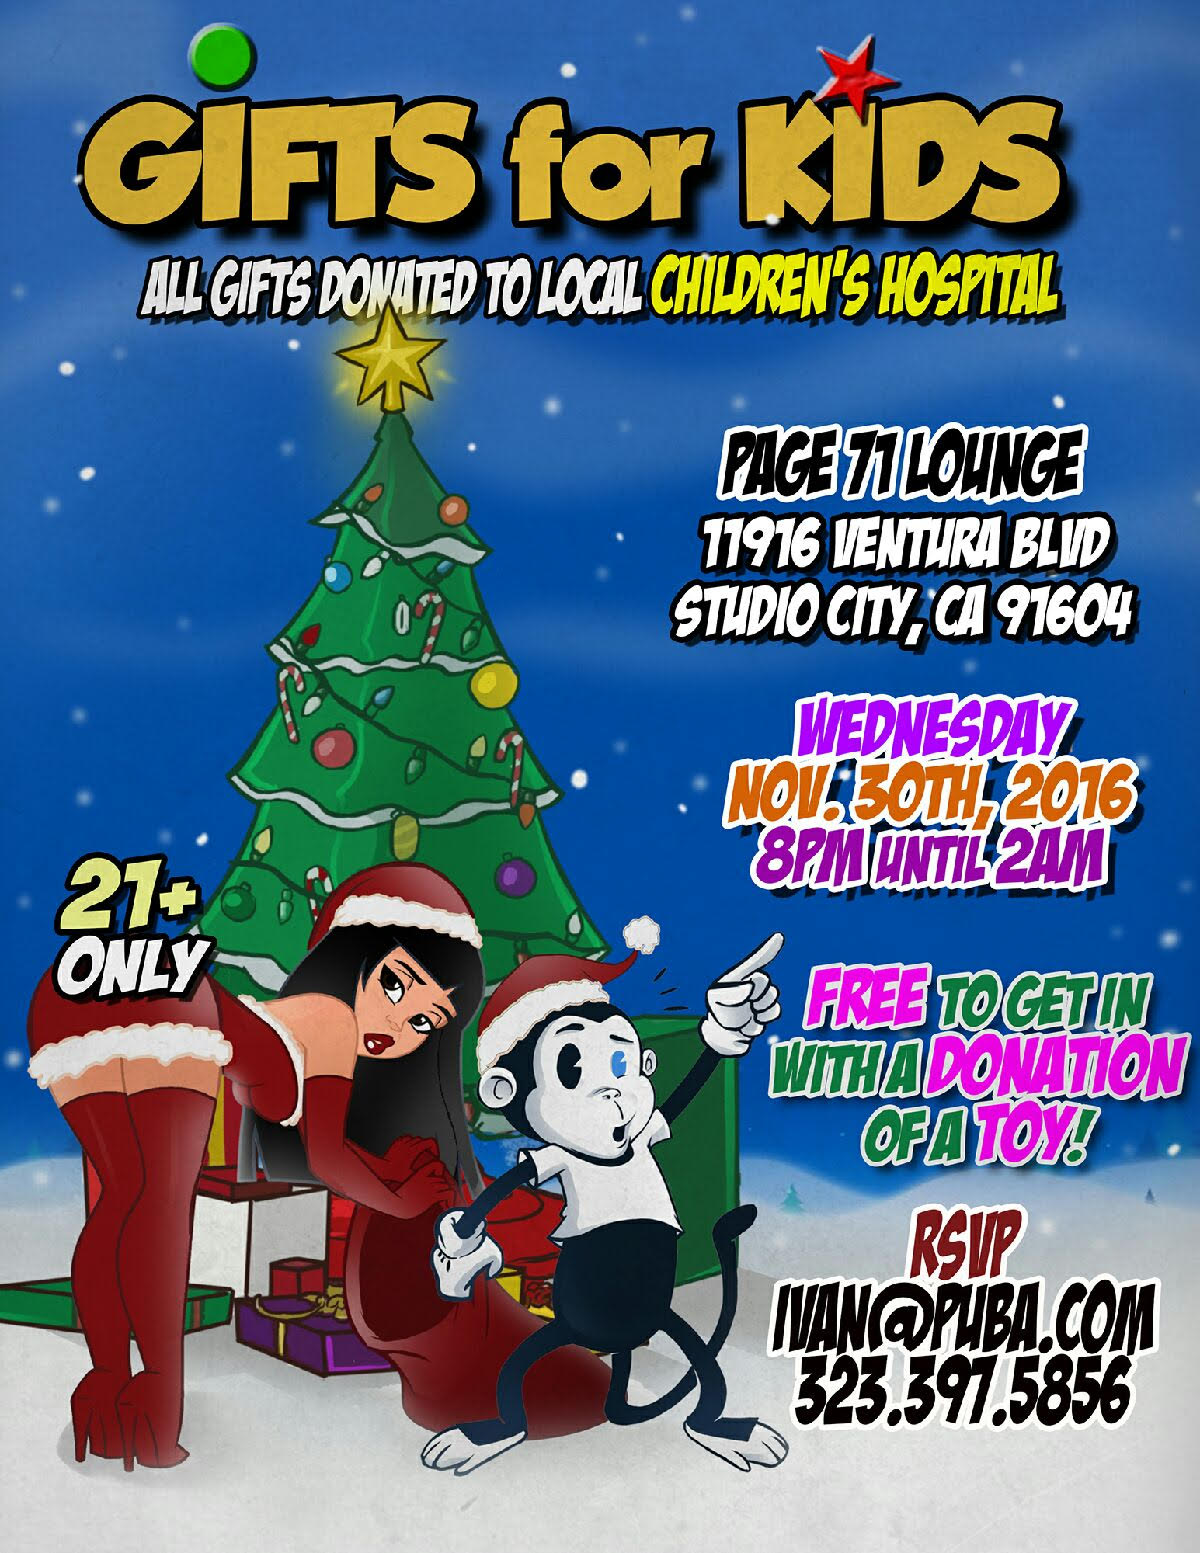 “Toy Drive for Children’s Hospital Wed Nov 30th at P71”